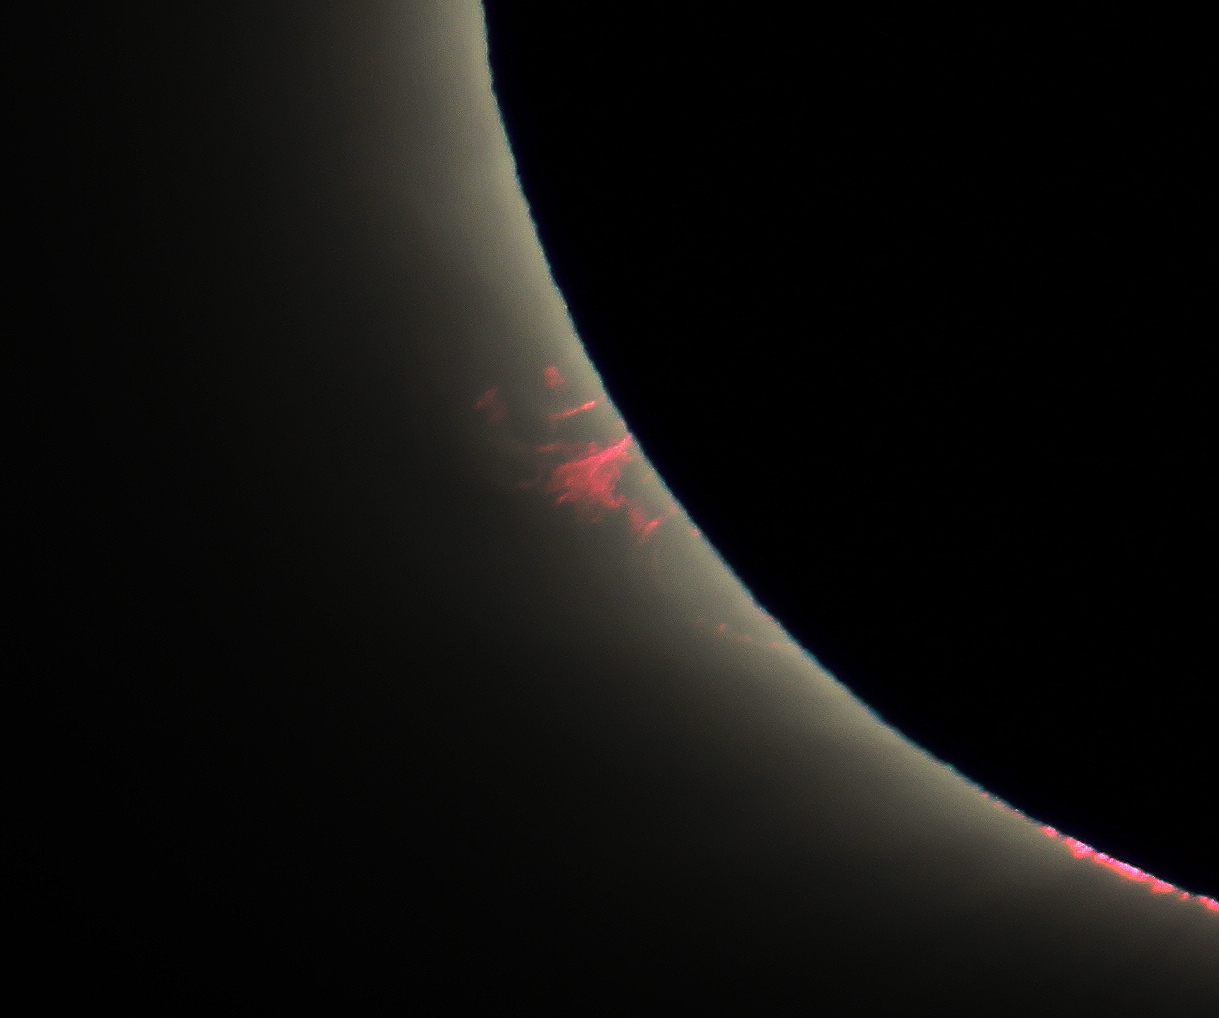 Solar prominences seen during the last total eclipse of the last millennium, as seen from France.